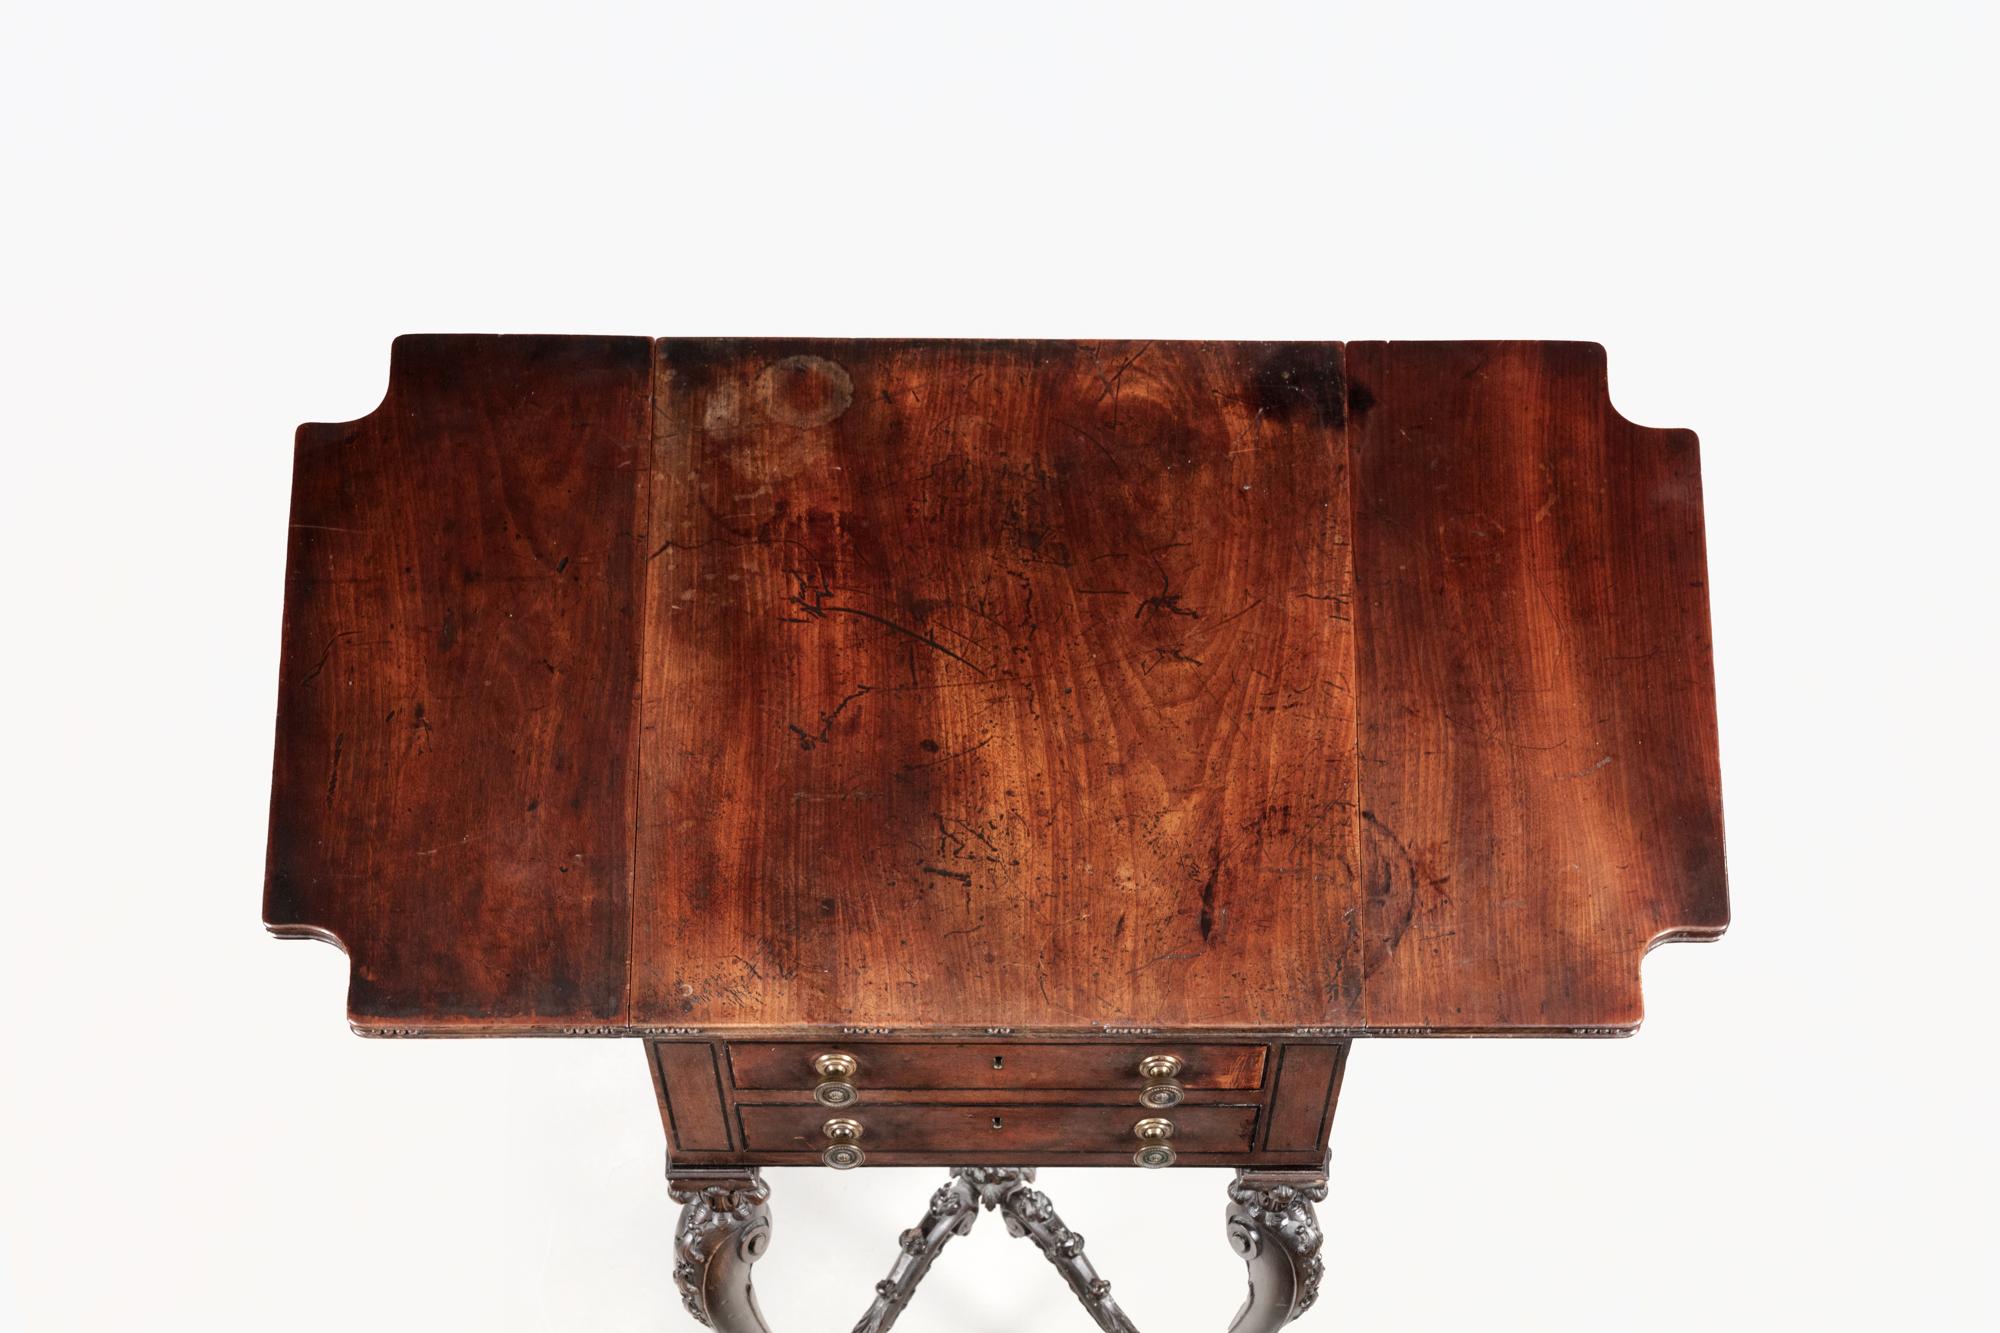 19th Century Mahogany Pembroke Table With Chippendale-Style Legs In Good Condition For Sale In Dublin 8, IE